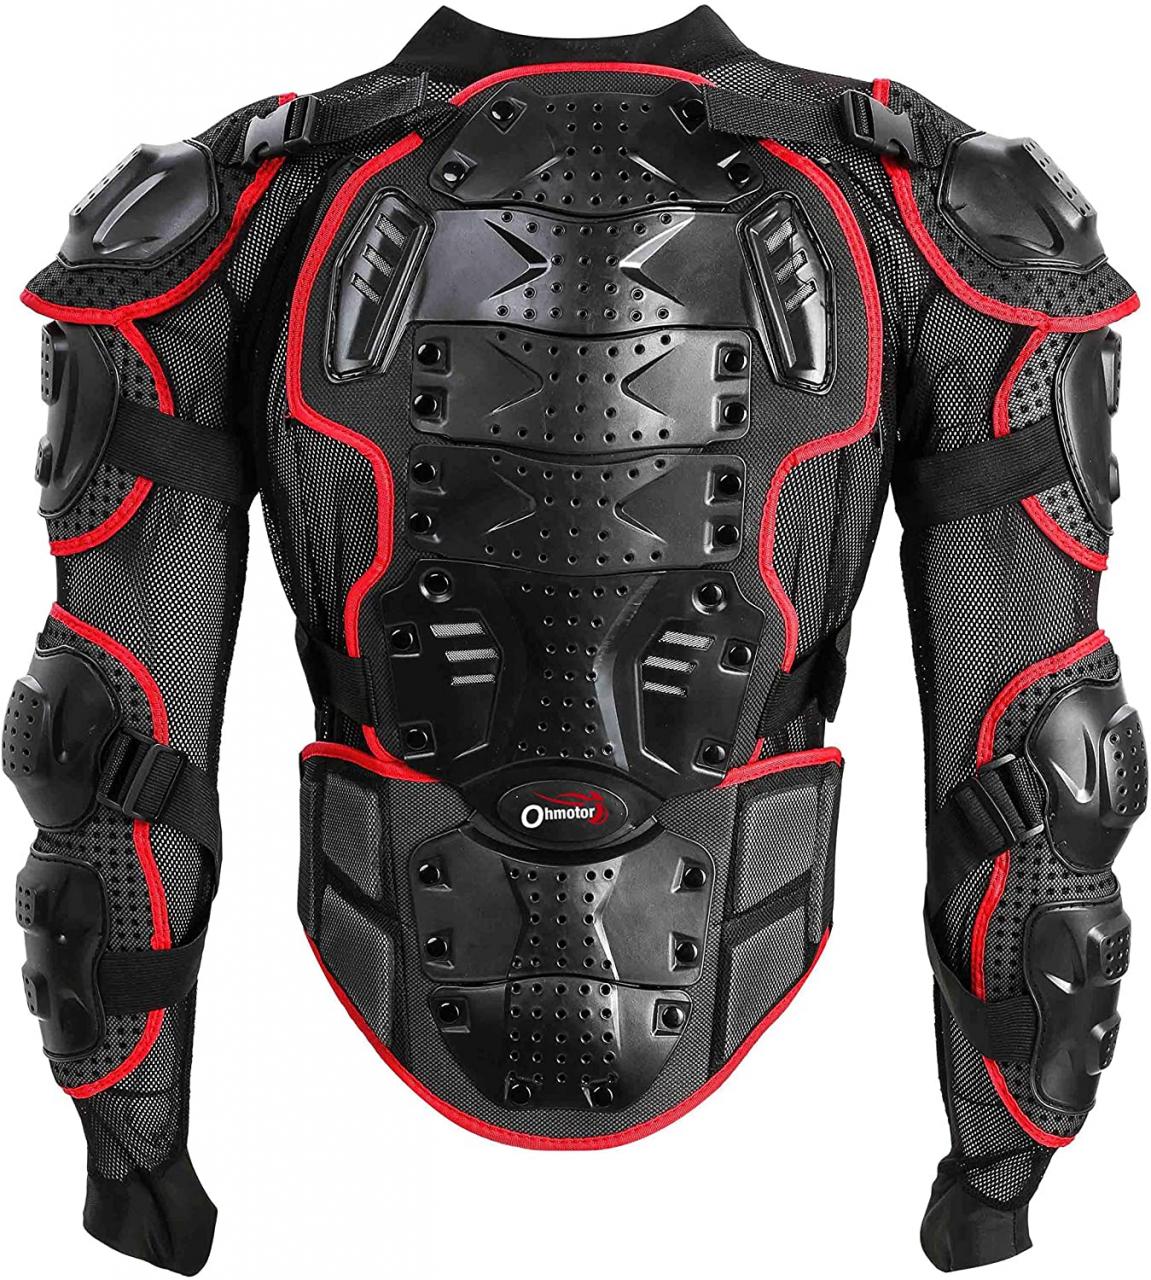 Buy OHMOTOR Motorcycle Motorbike Full Body Armor Protector Pro Street Motocross  ATV Guard Shirt Jacket with Back Protection(Red, L) Online in Germany.  B07L87Y339